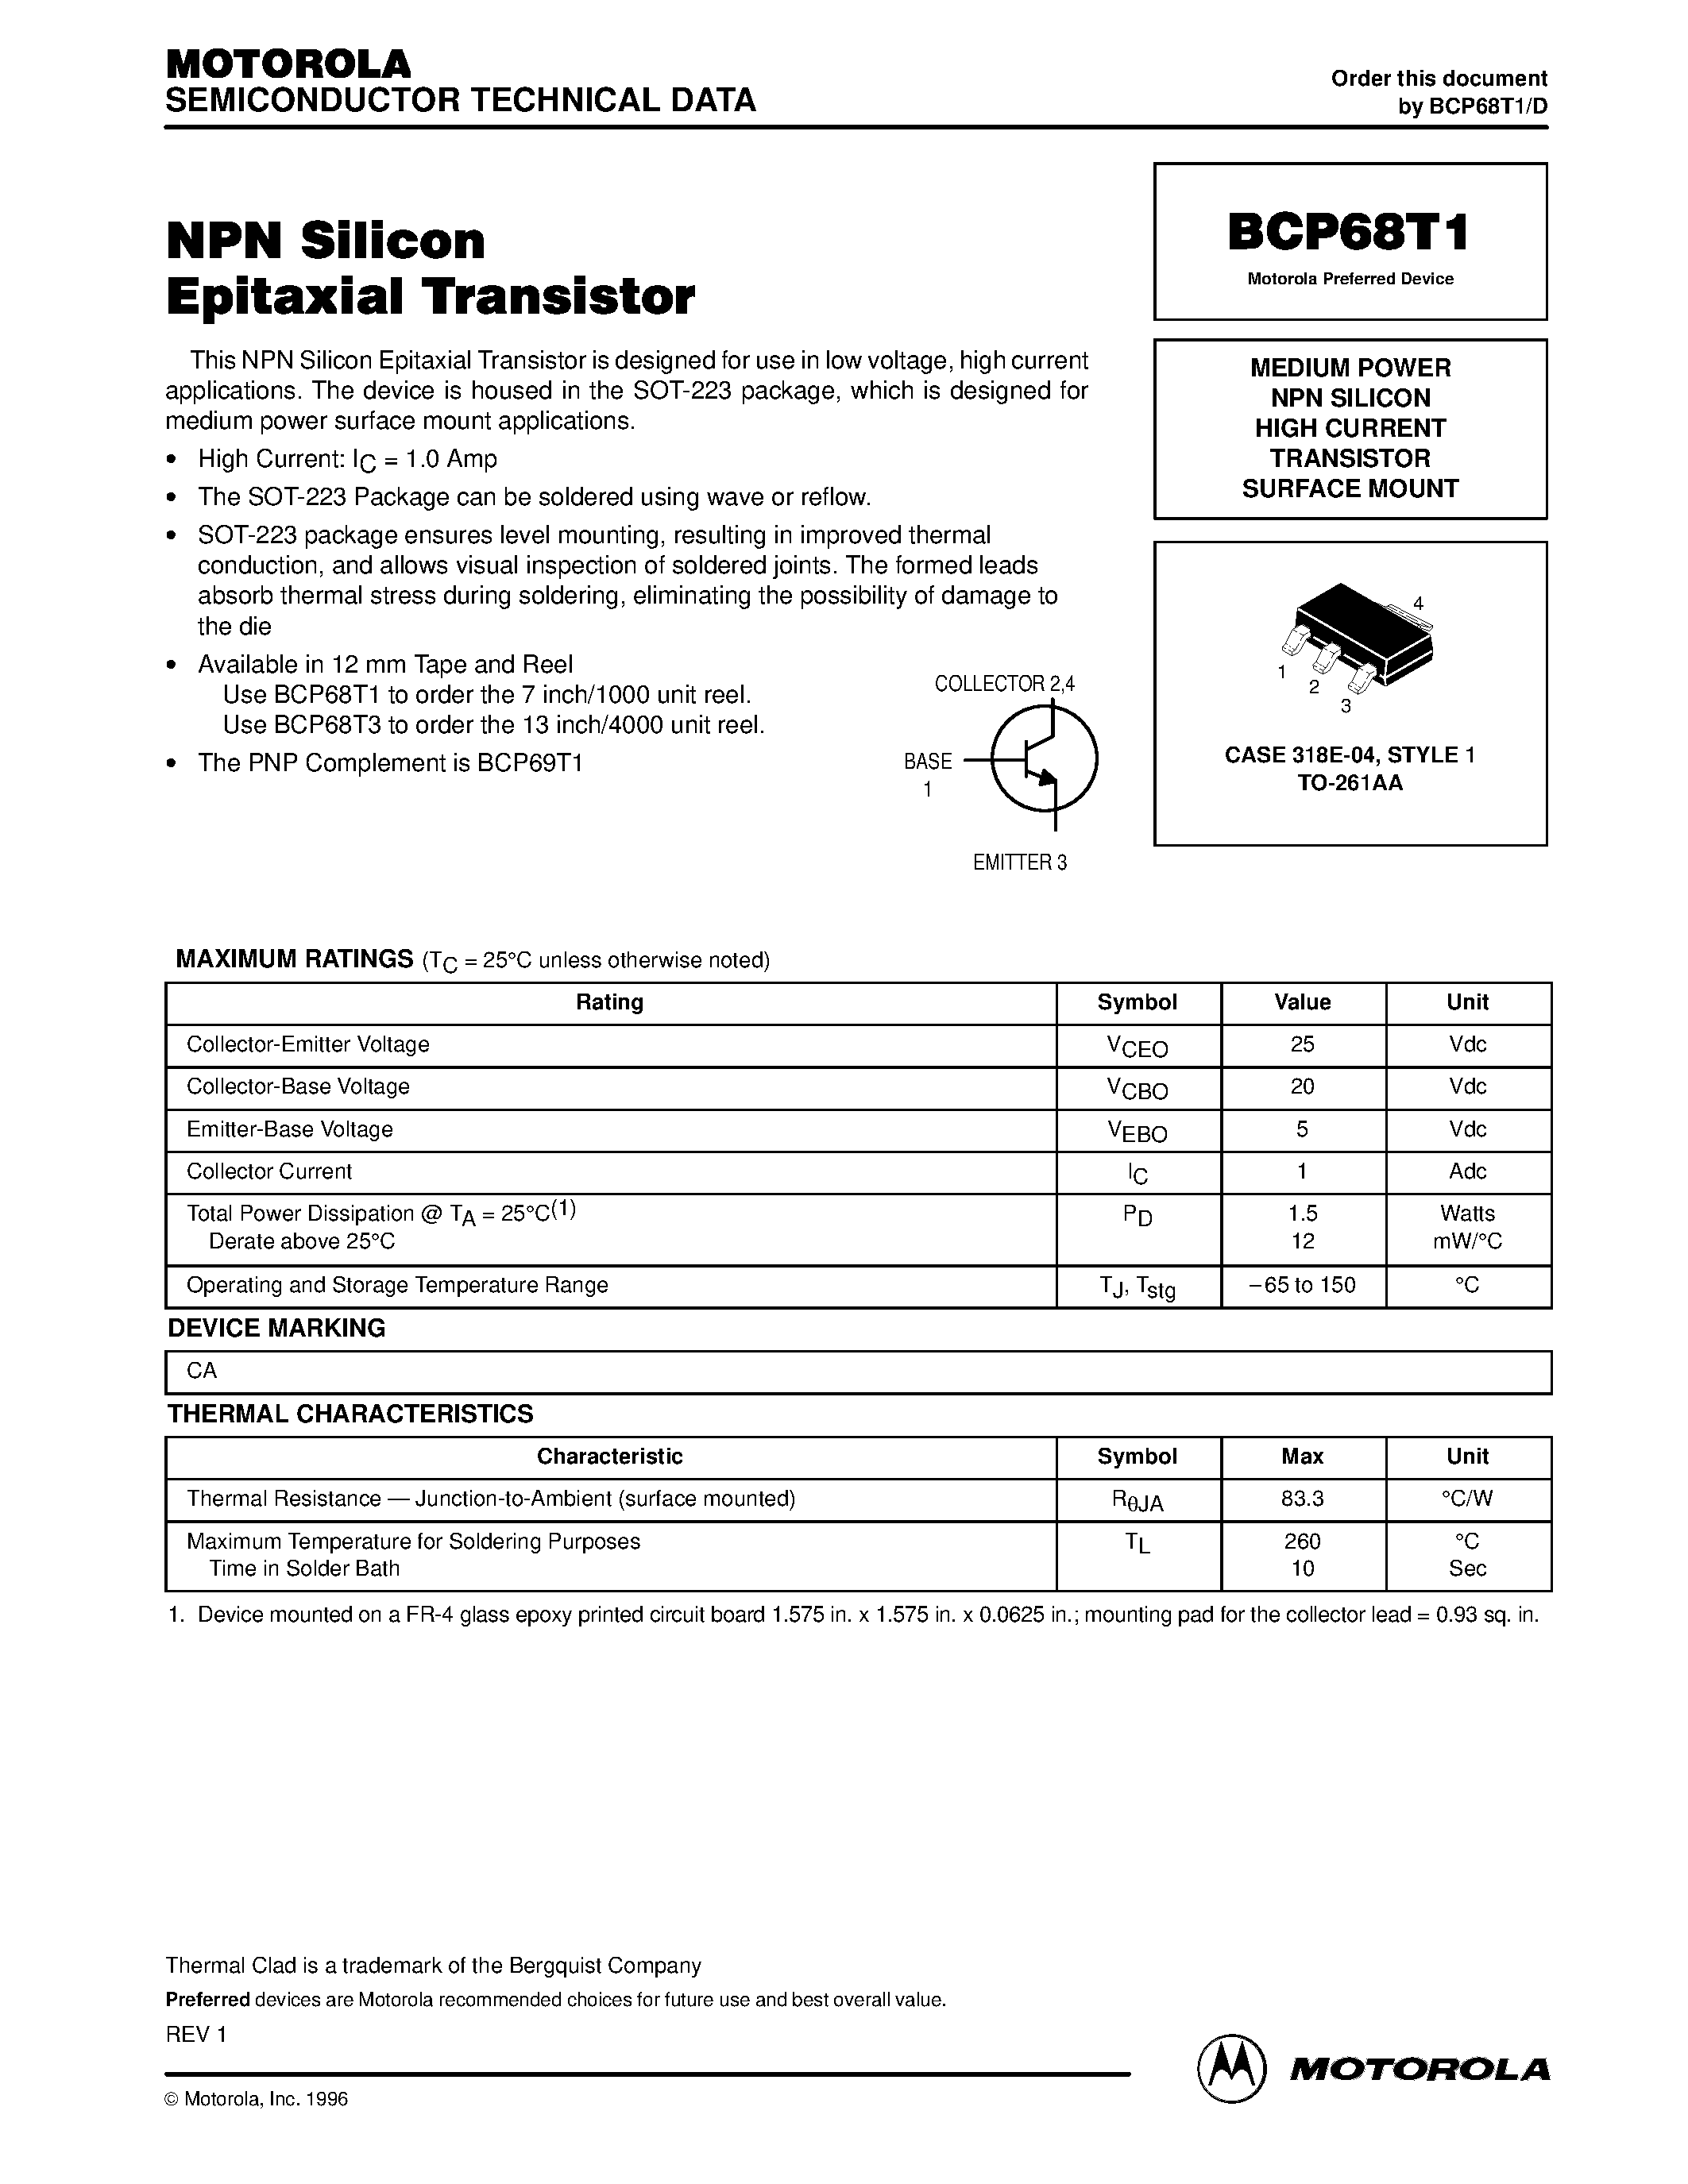 Datasheet BCP68T1 - MEDIUM POWER NPN SILICON HIGH CURRENT TRANSISTOR SURFACE MOUNT page 1